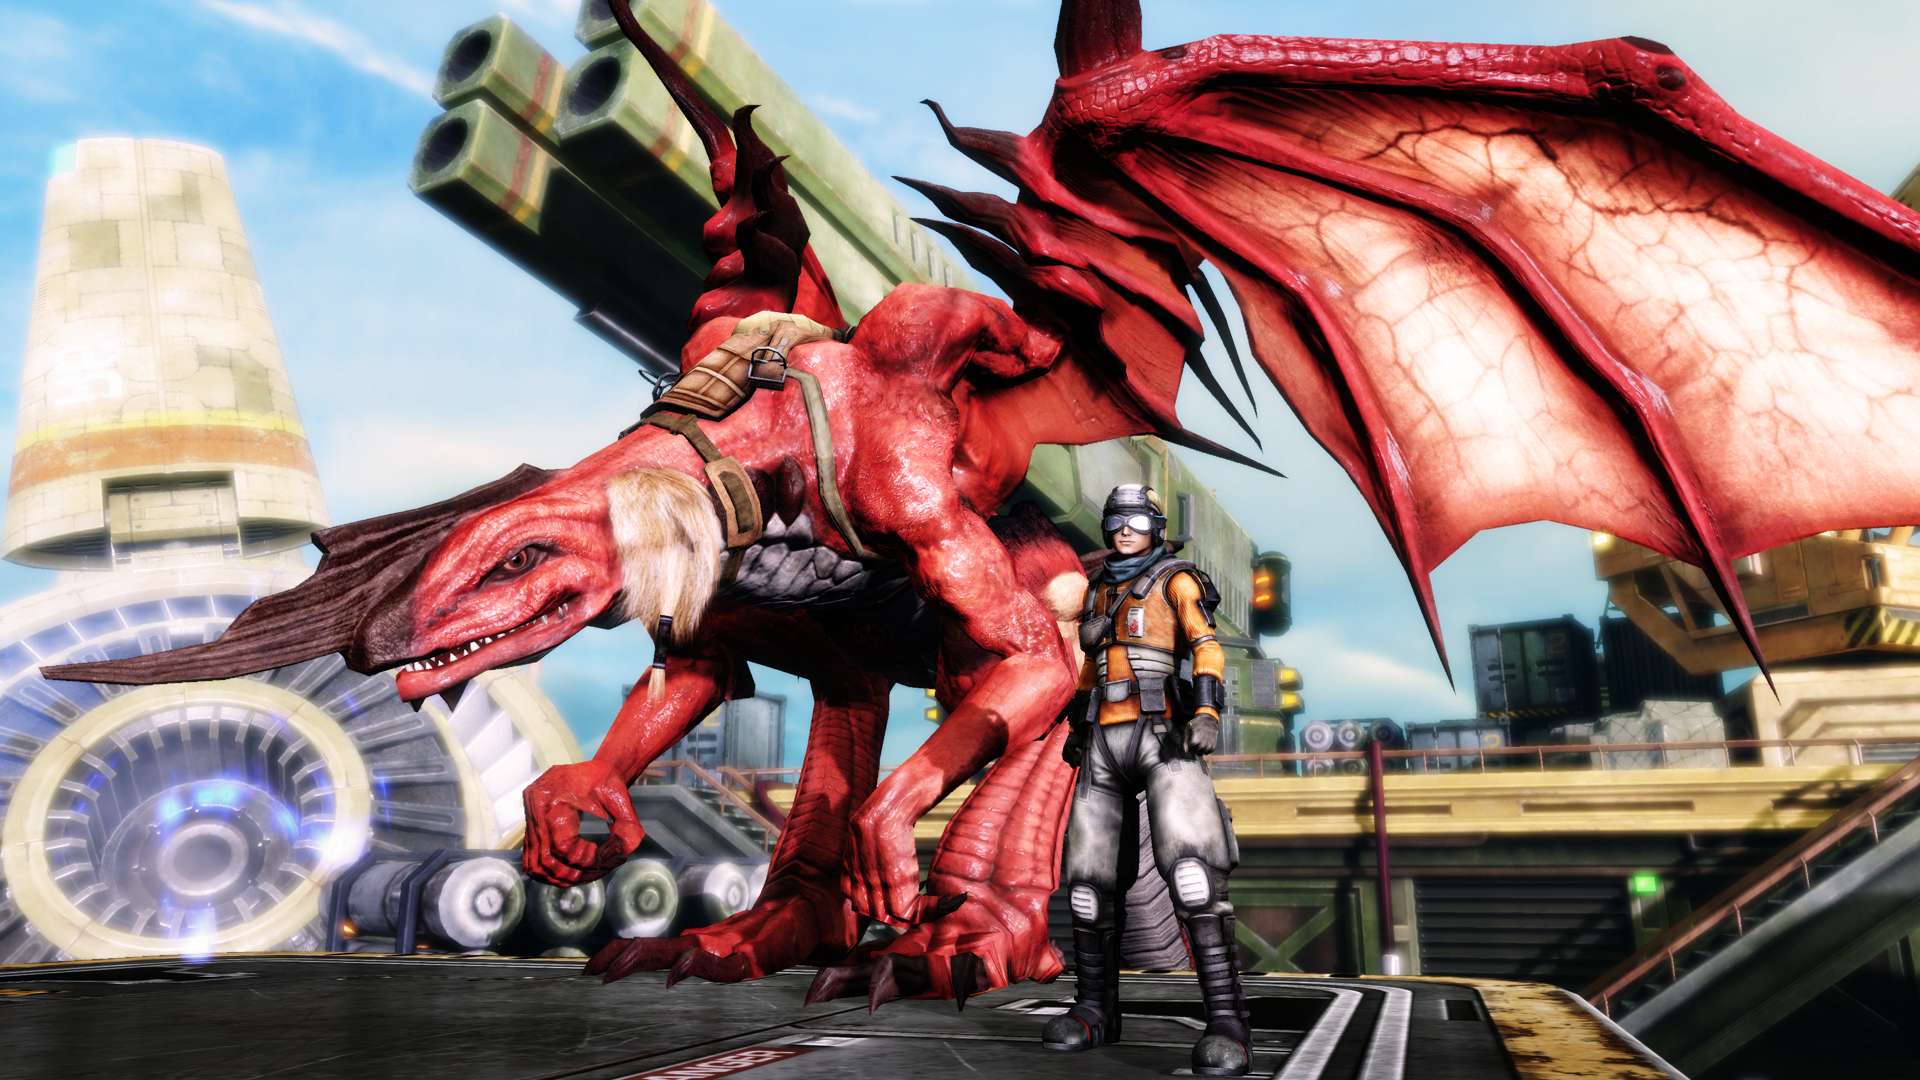 The Bloodskin Dragon from Crimson Dragon is Pretty Wicked